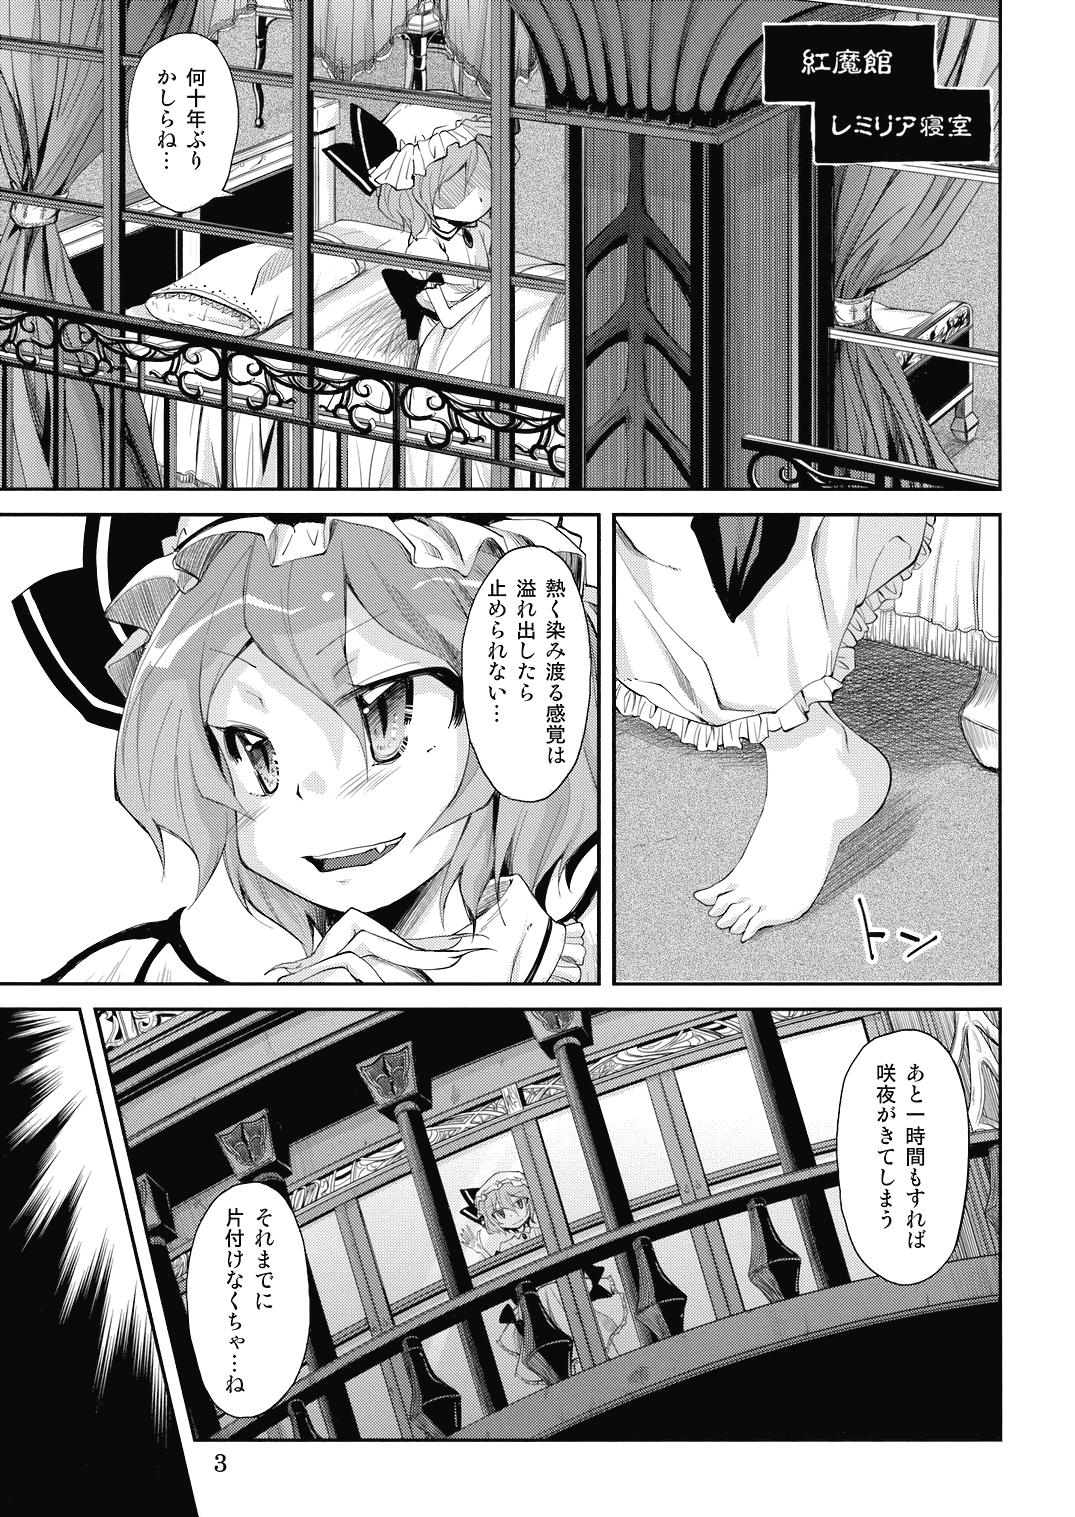 18 Year Old Porn NH3 - Touhou project Old Man - Page 3